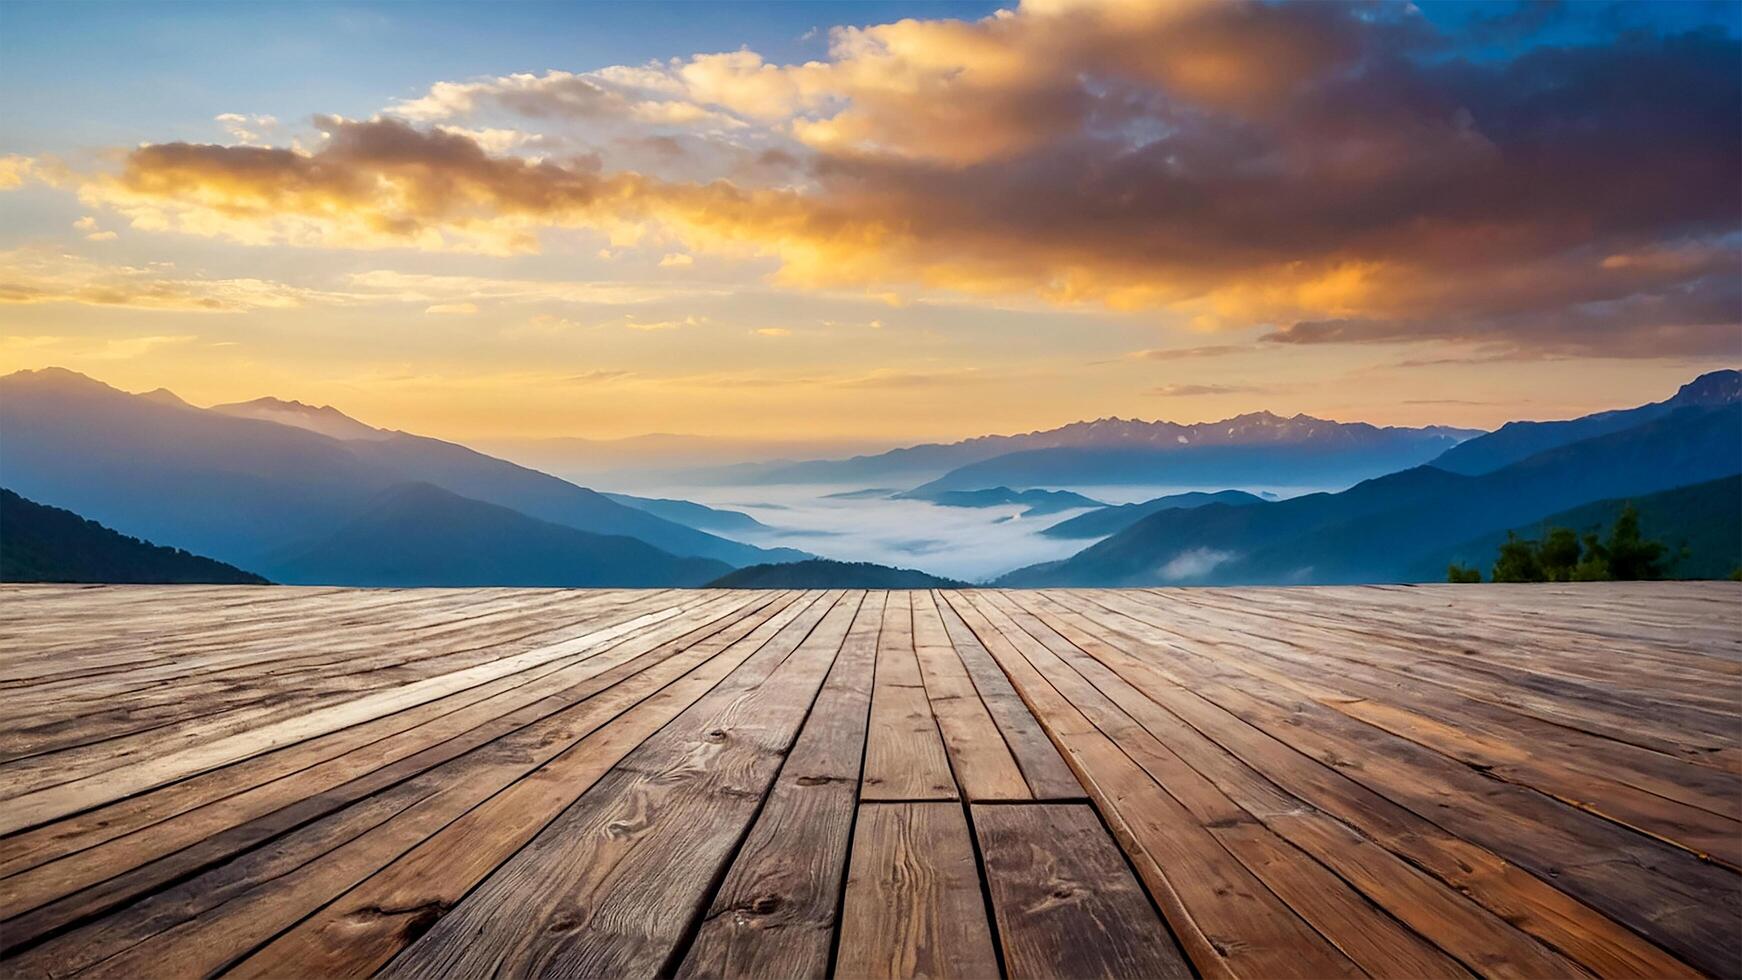 Wooden balcony with sunset and mountain views. Beautiful panoramic natural scenery photo